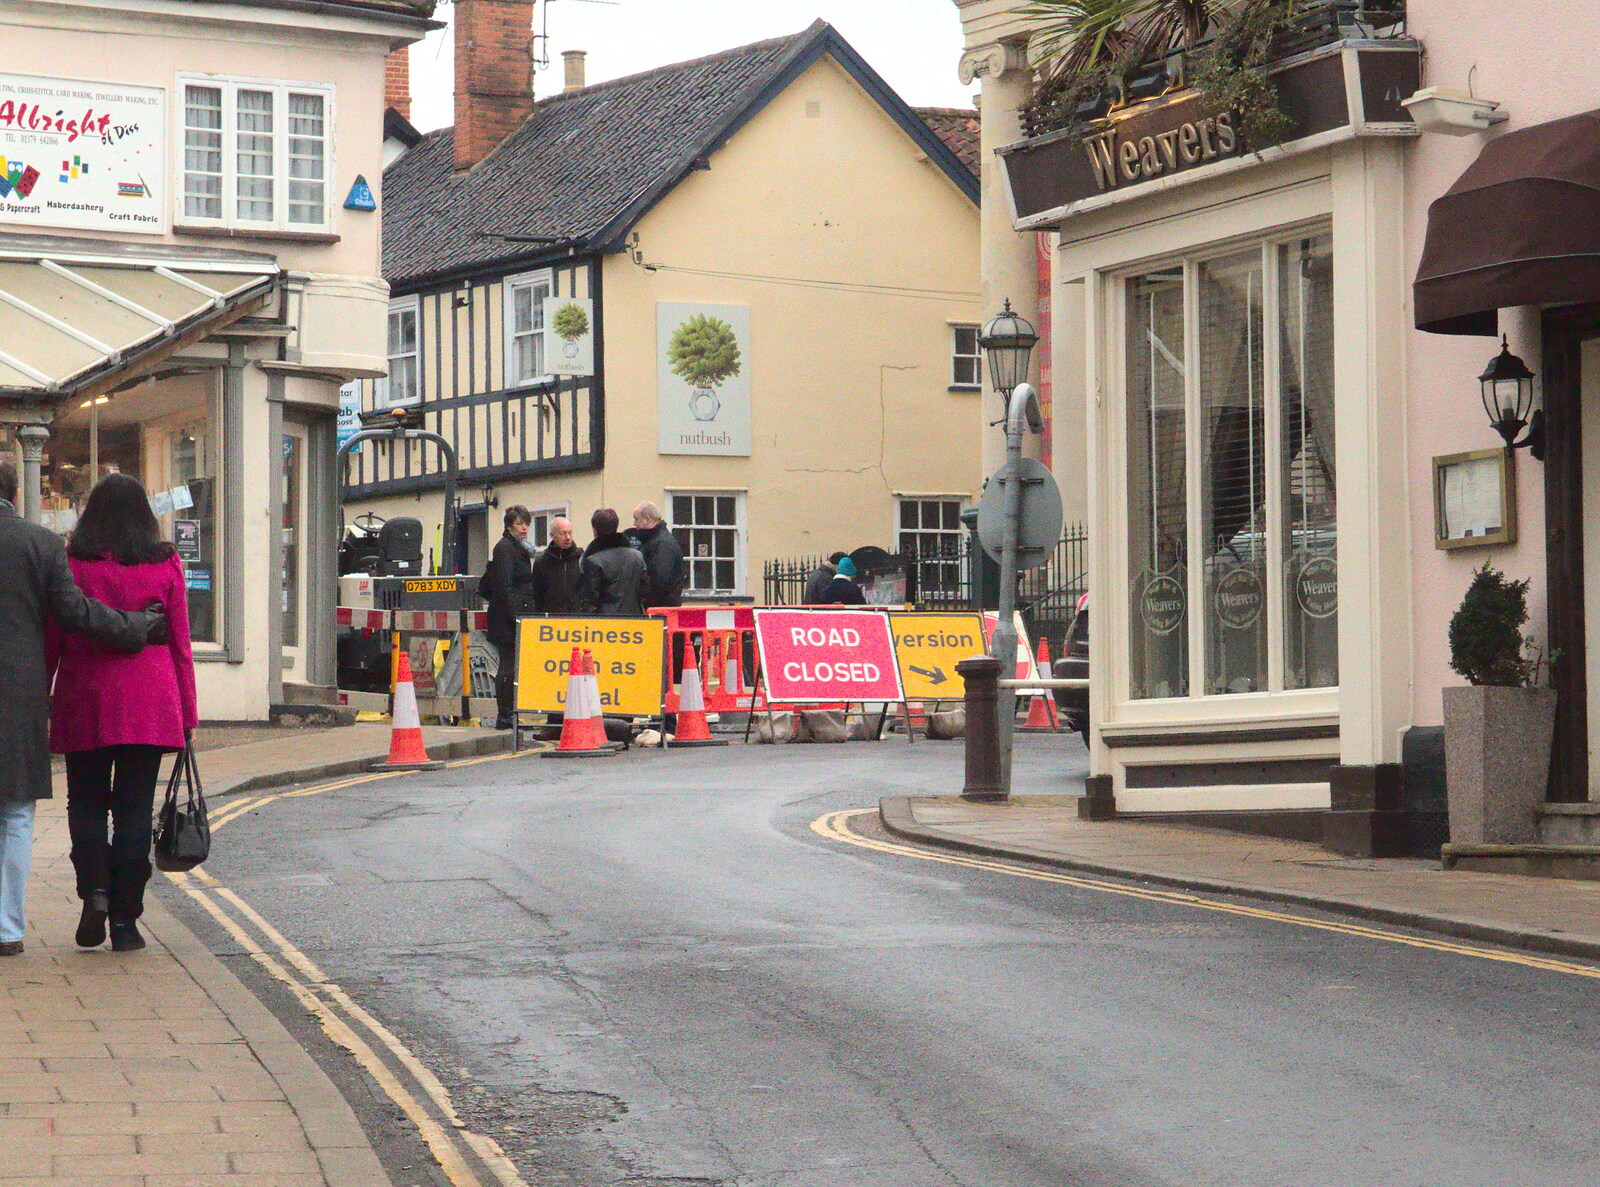 St. Nicholas Street in Diss is closed from Closing Down: A Late January Miscellany, Diss, Norfolk - 31st January 2015